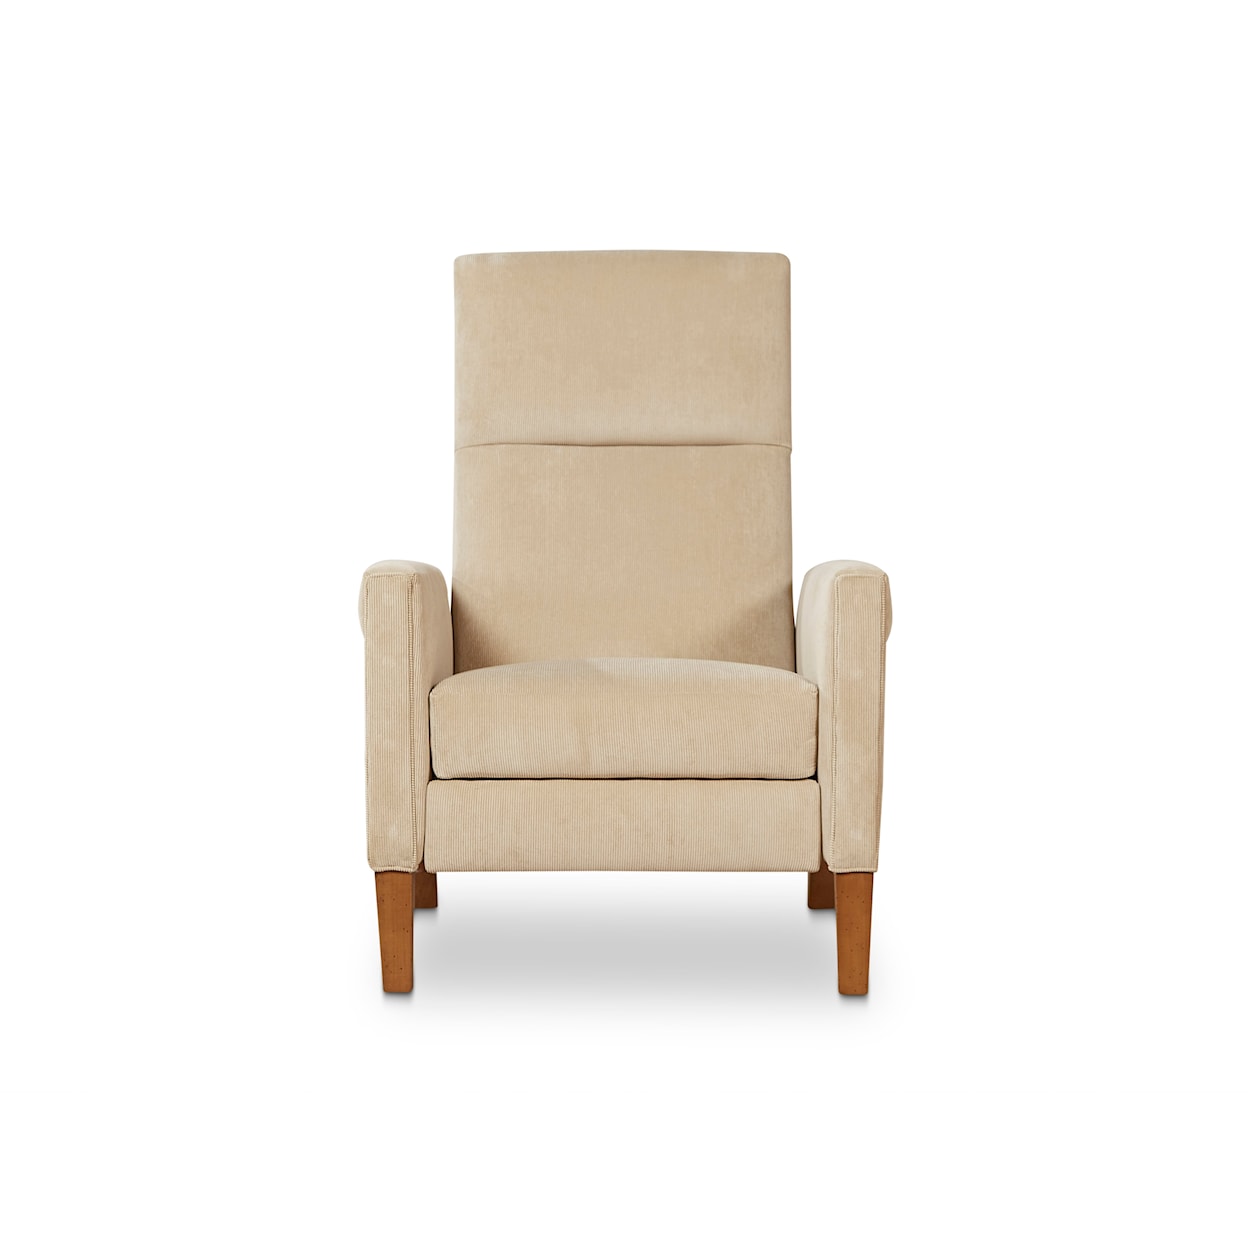 Huntington House Recliners Reclining Chair